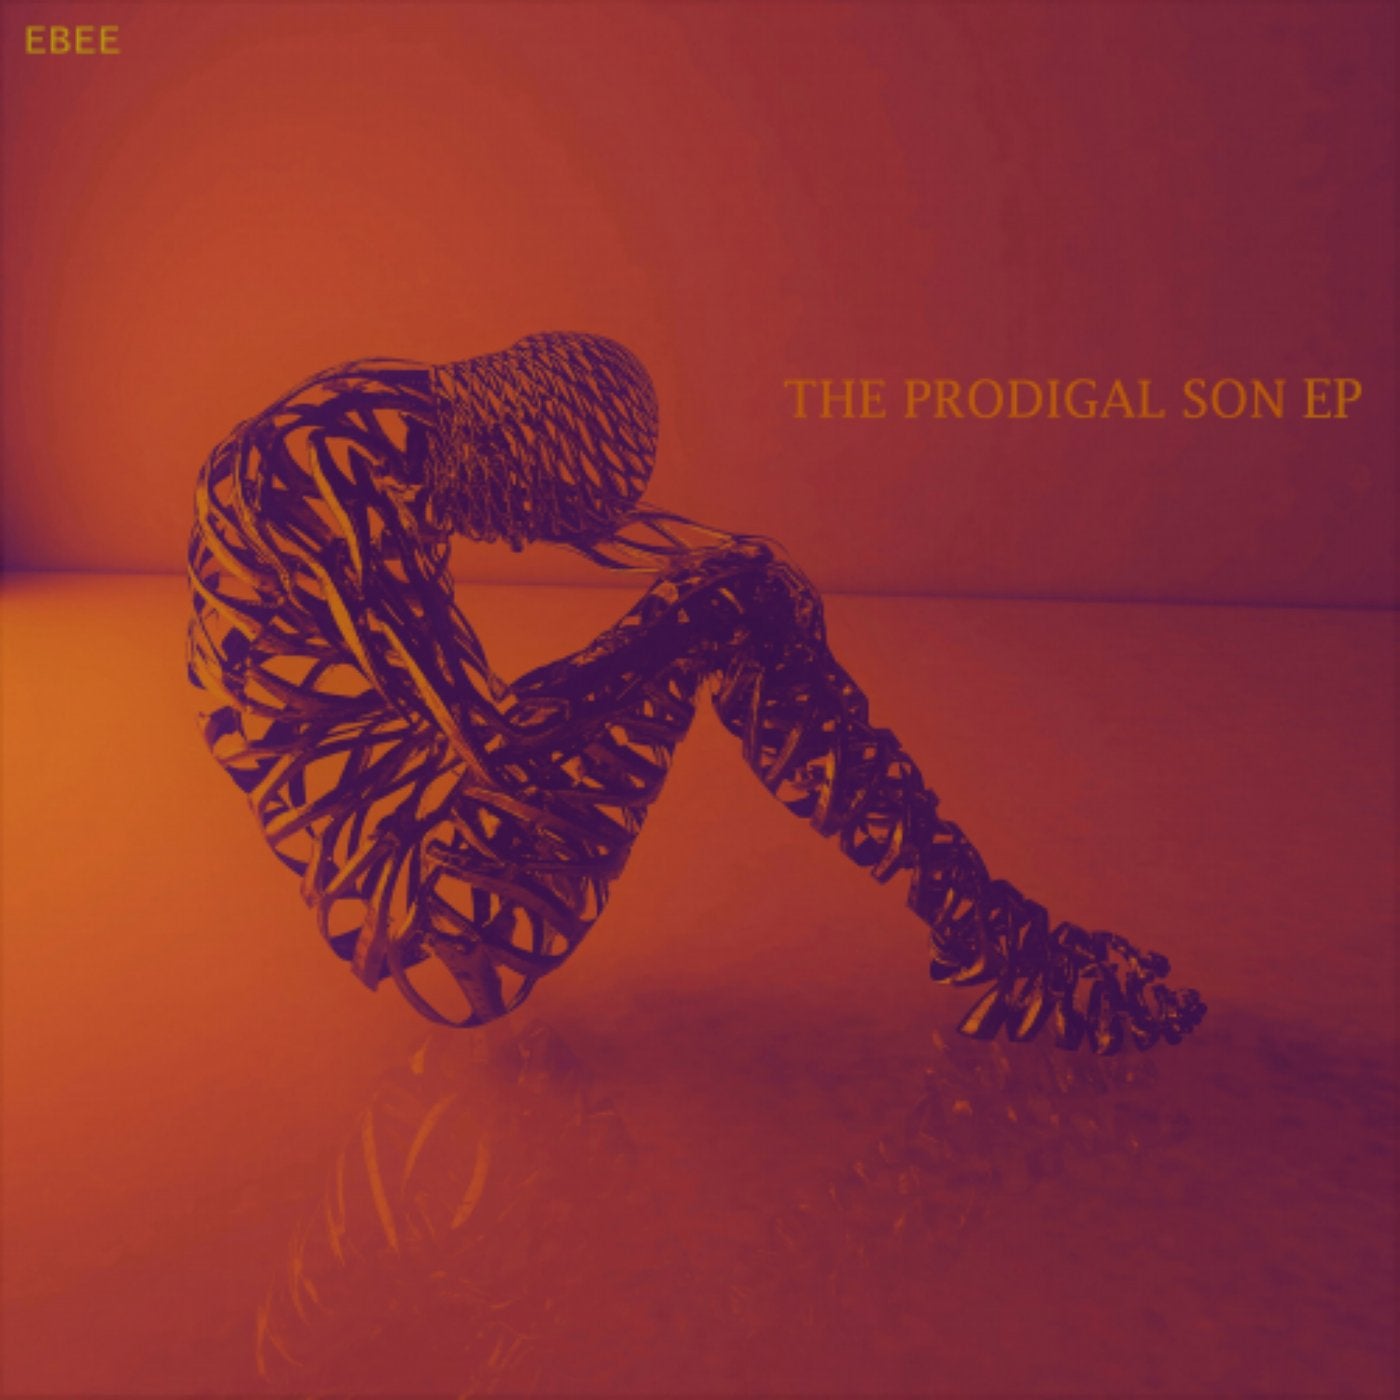 The Prodigal Son EP